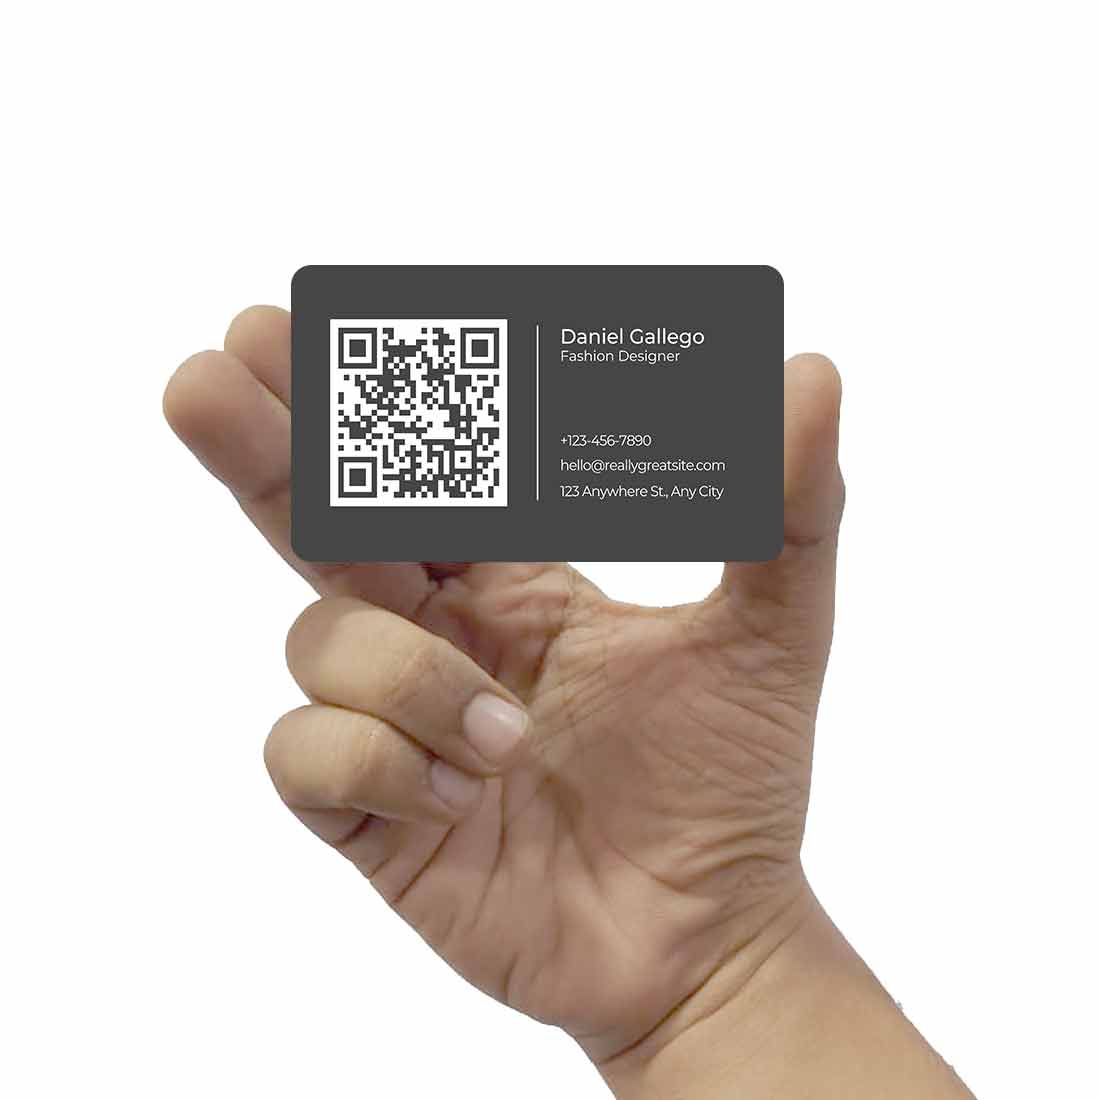 QR Code Visiting Card with NFC Business Card-Scan or Tap to Share Your Contact